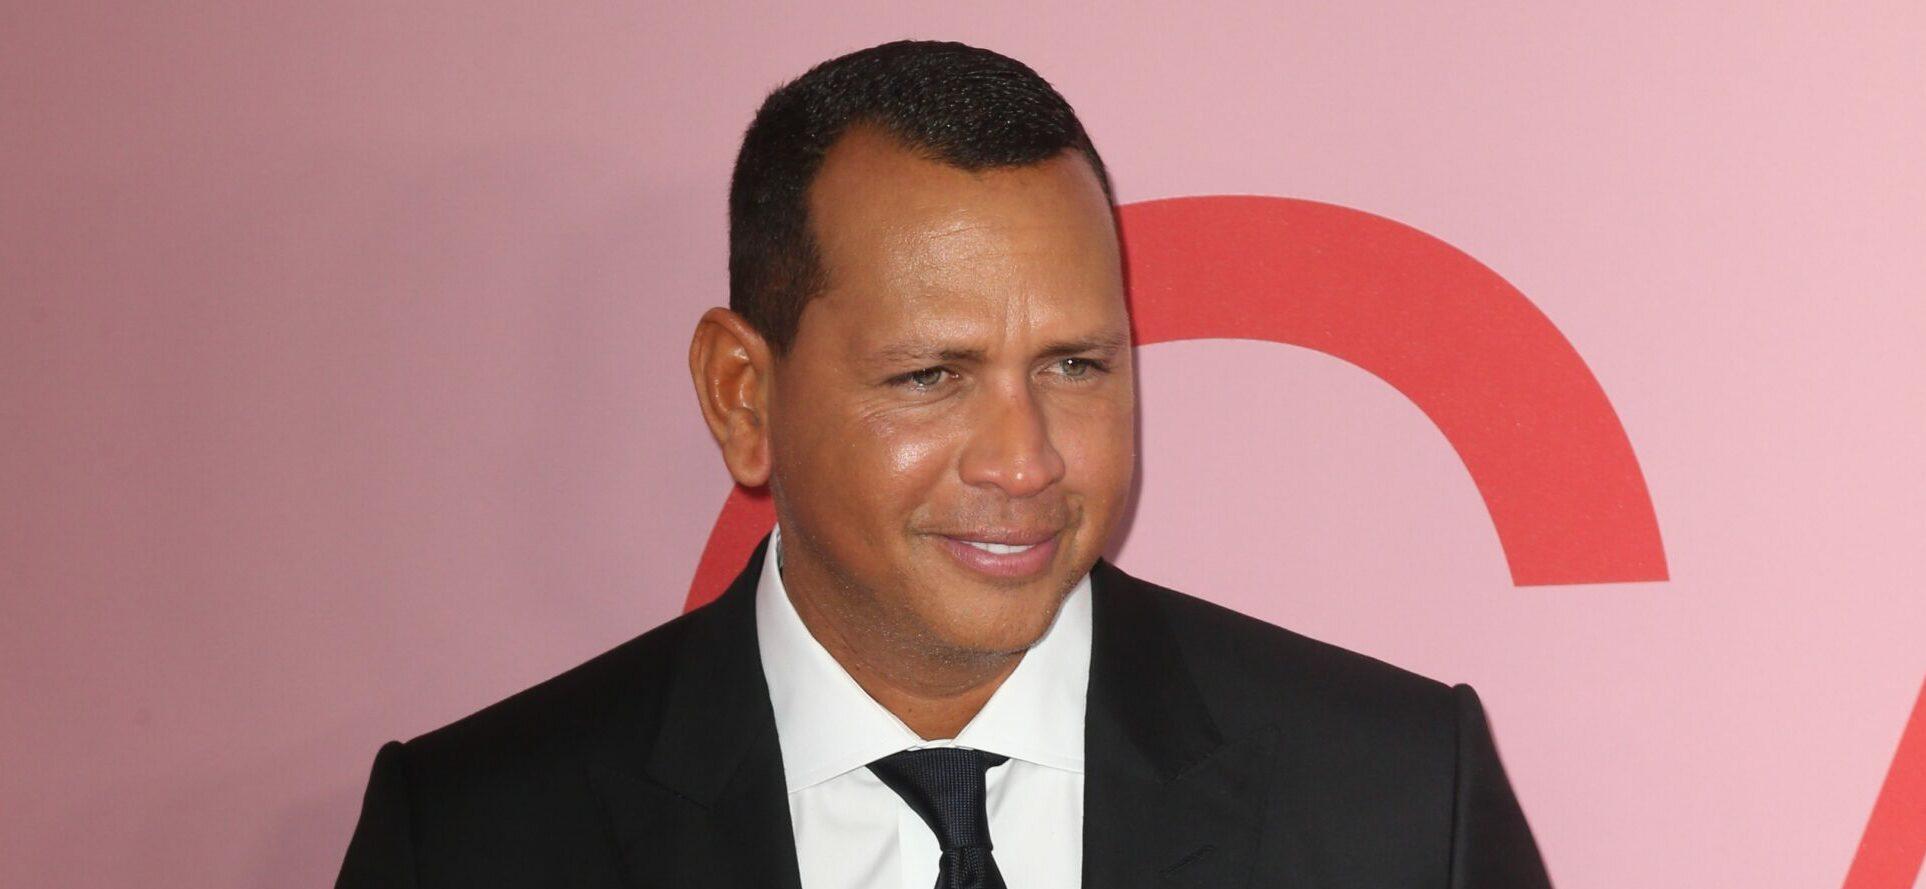 Alex Rodriguez Gets Trolled By Red Sox Fans Over 'Bennifer' At MLB Playoffs